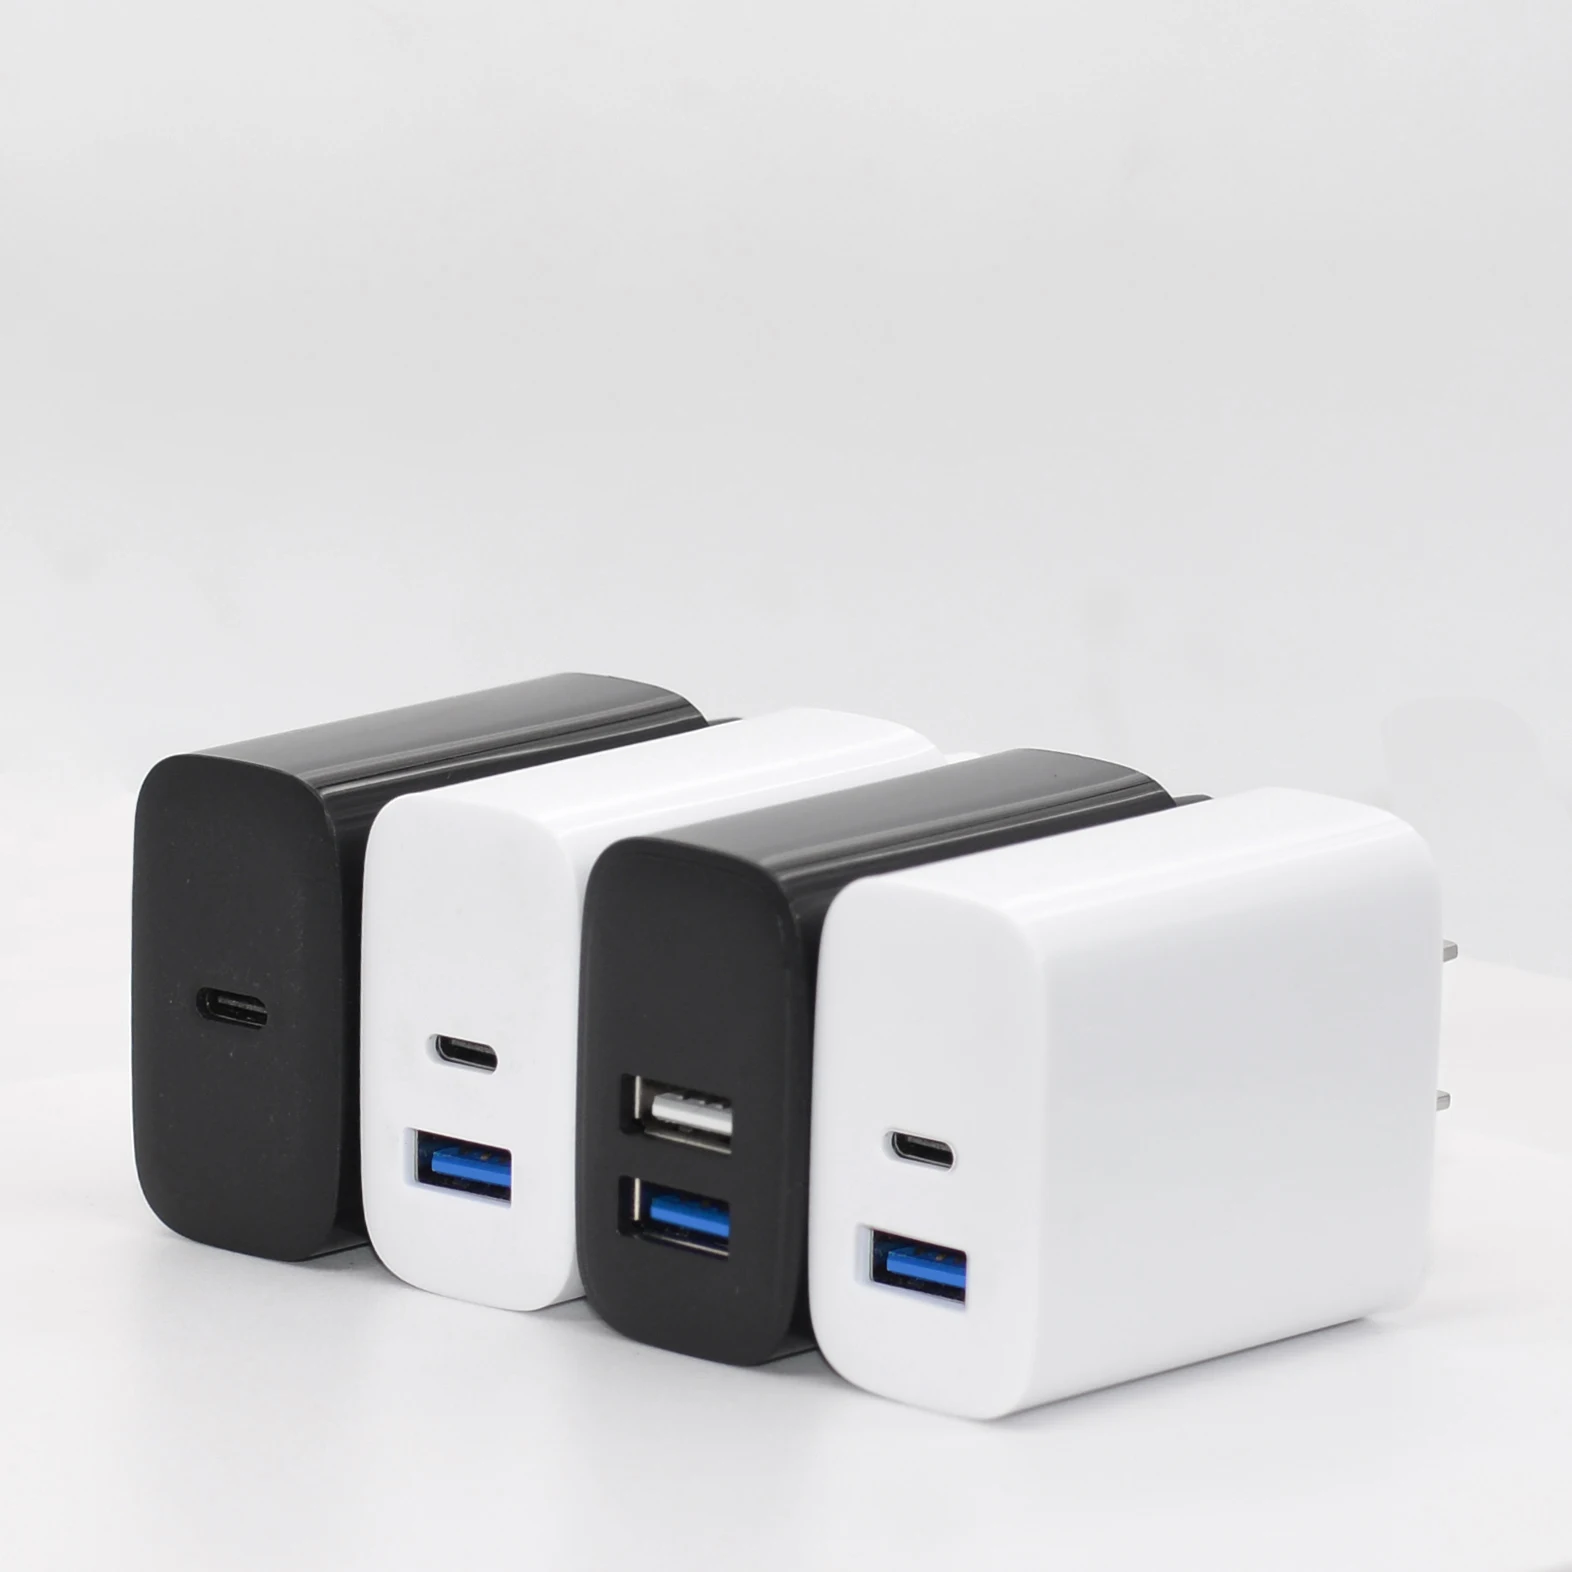 

ready to ship type c PD 18W + QC3.0 usb fast charging wall charger for iPhone smart phone power adapter paper box packing, White / black